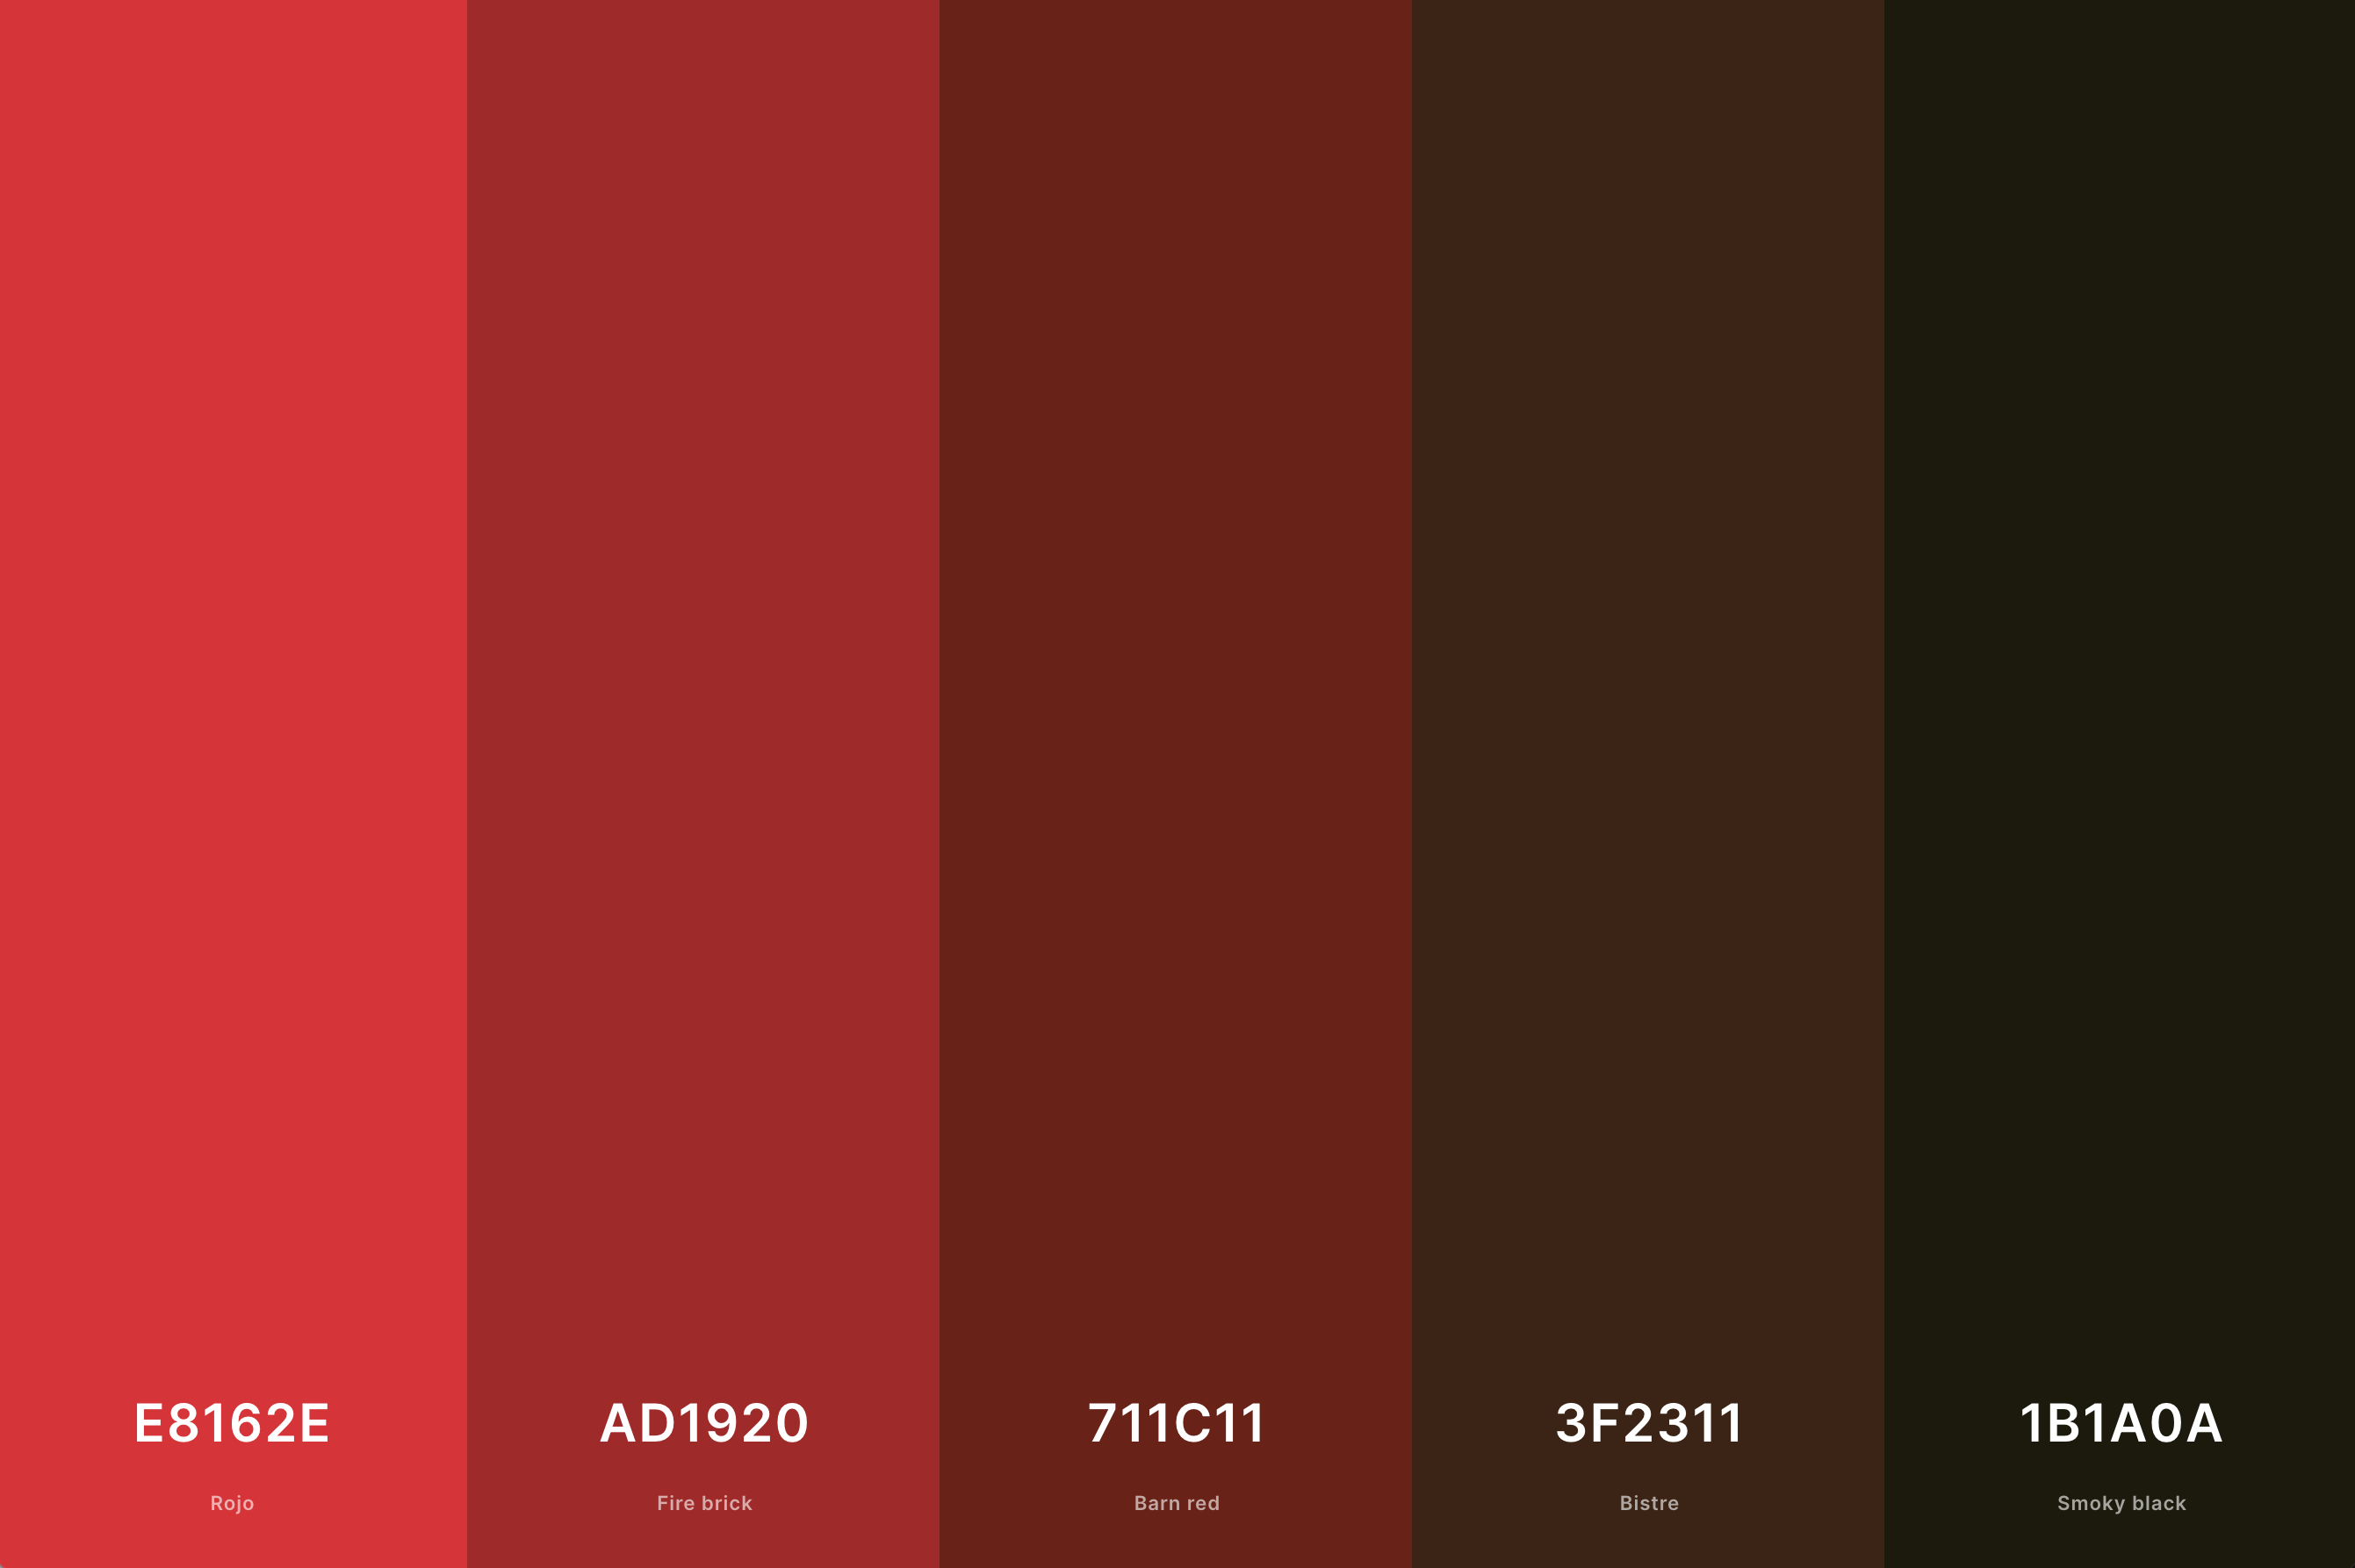 5. Red And Brown Color Palette Color Palette with Rojo (Hex #E8162E) + Fire Brick (Hex #AD1920) + Barn Red (Hex #711C11) + Bistre (Hex #3F2311) + Smoky Black (Hex #1B1A0A) Color Palette with Hex Codes